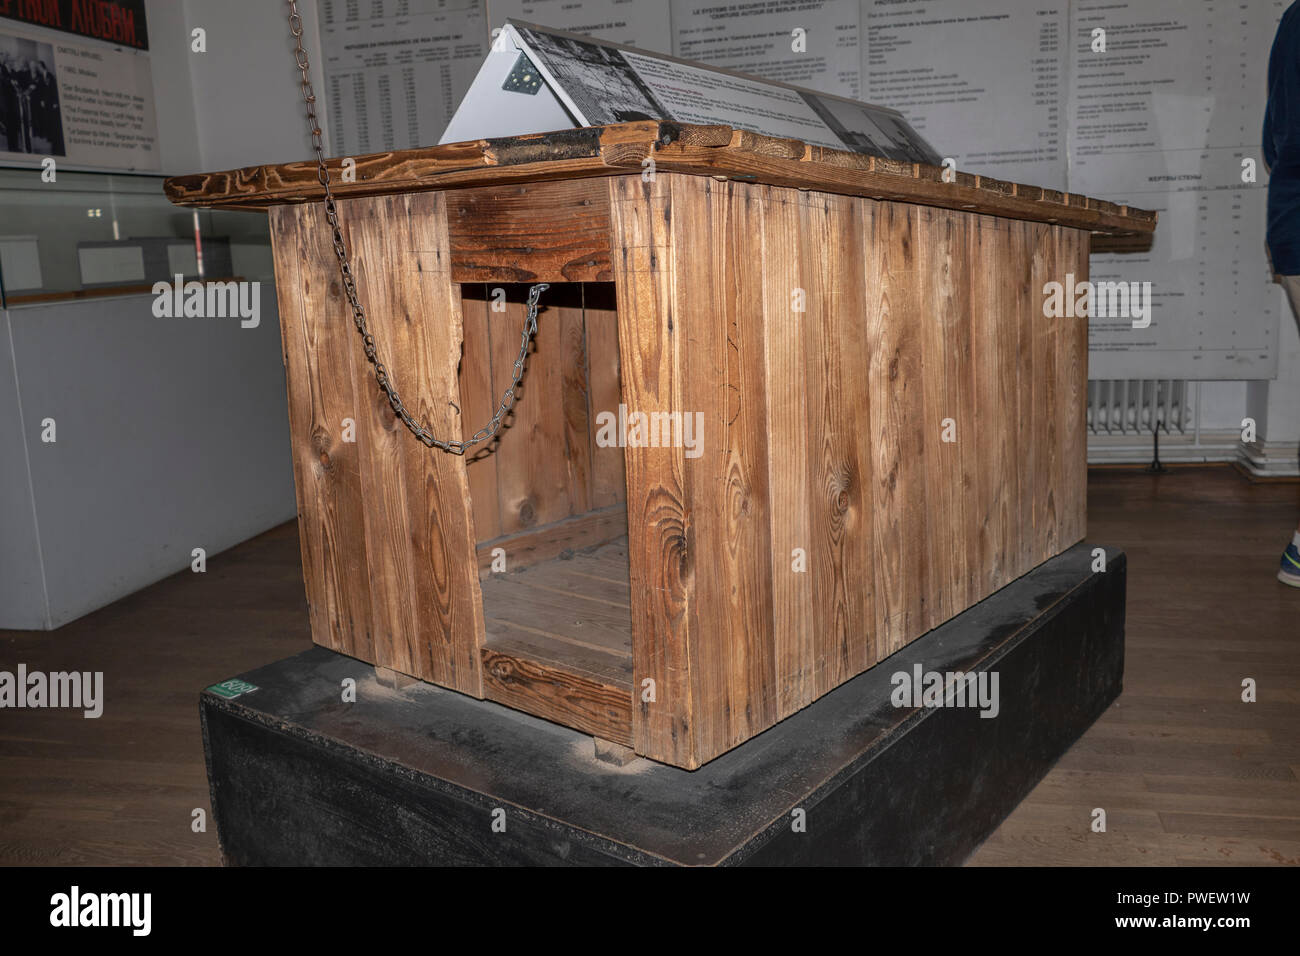 A guard dog house used on the Berlin Wall separating East and West Berlin between 1961-1989. Now displayed in the Mauermuseum Berlin. Stock Photo